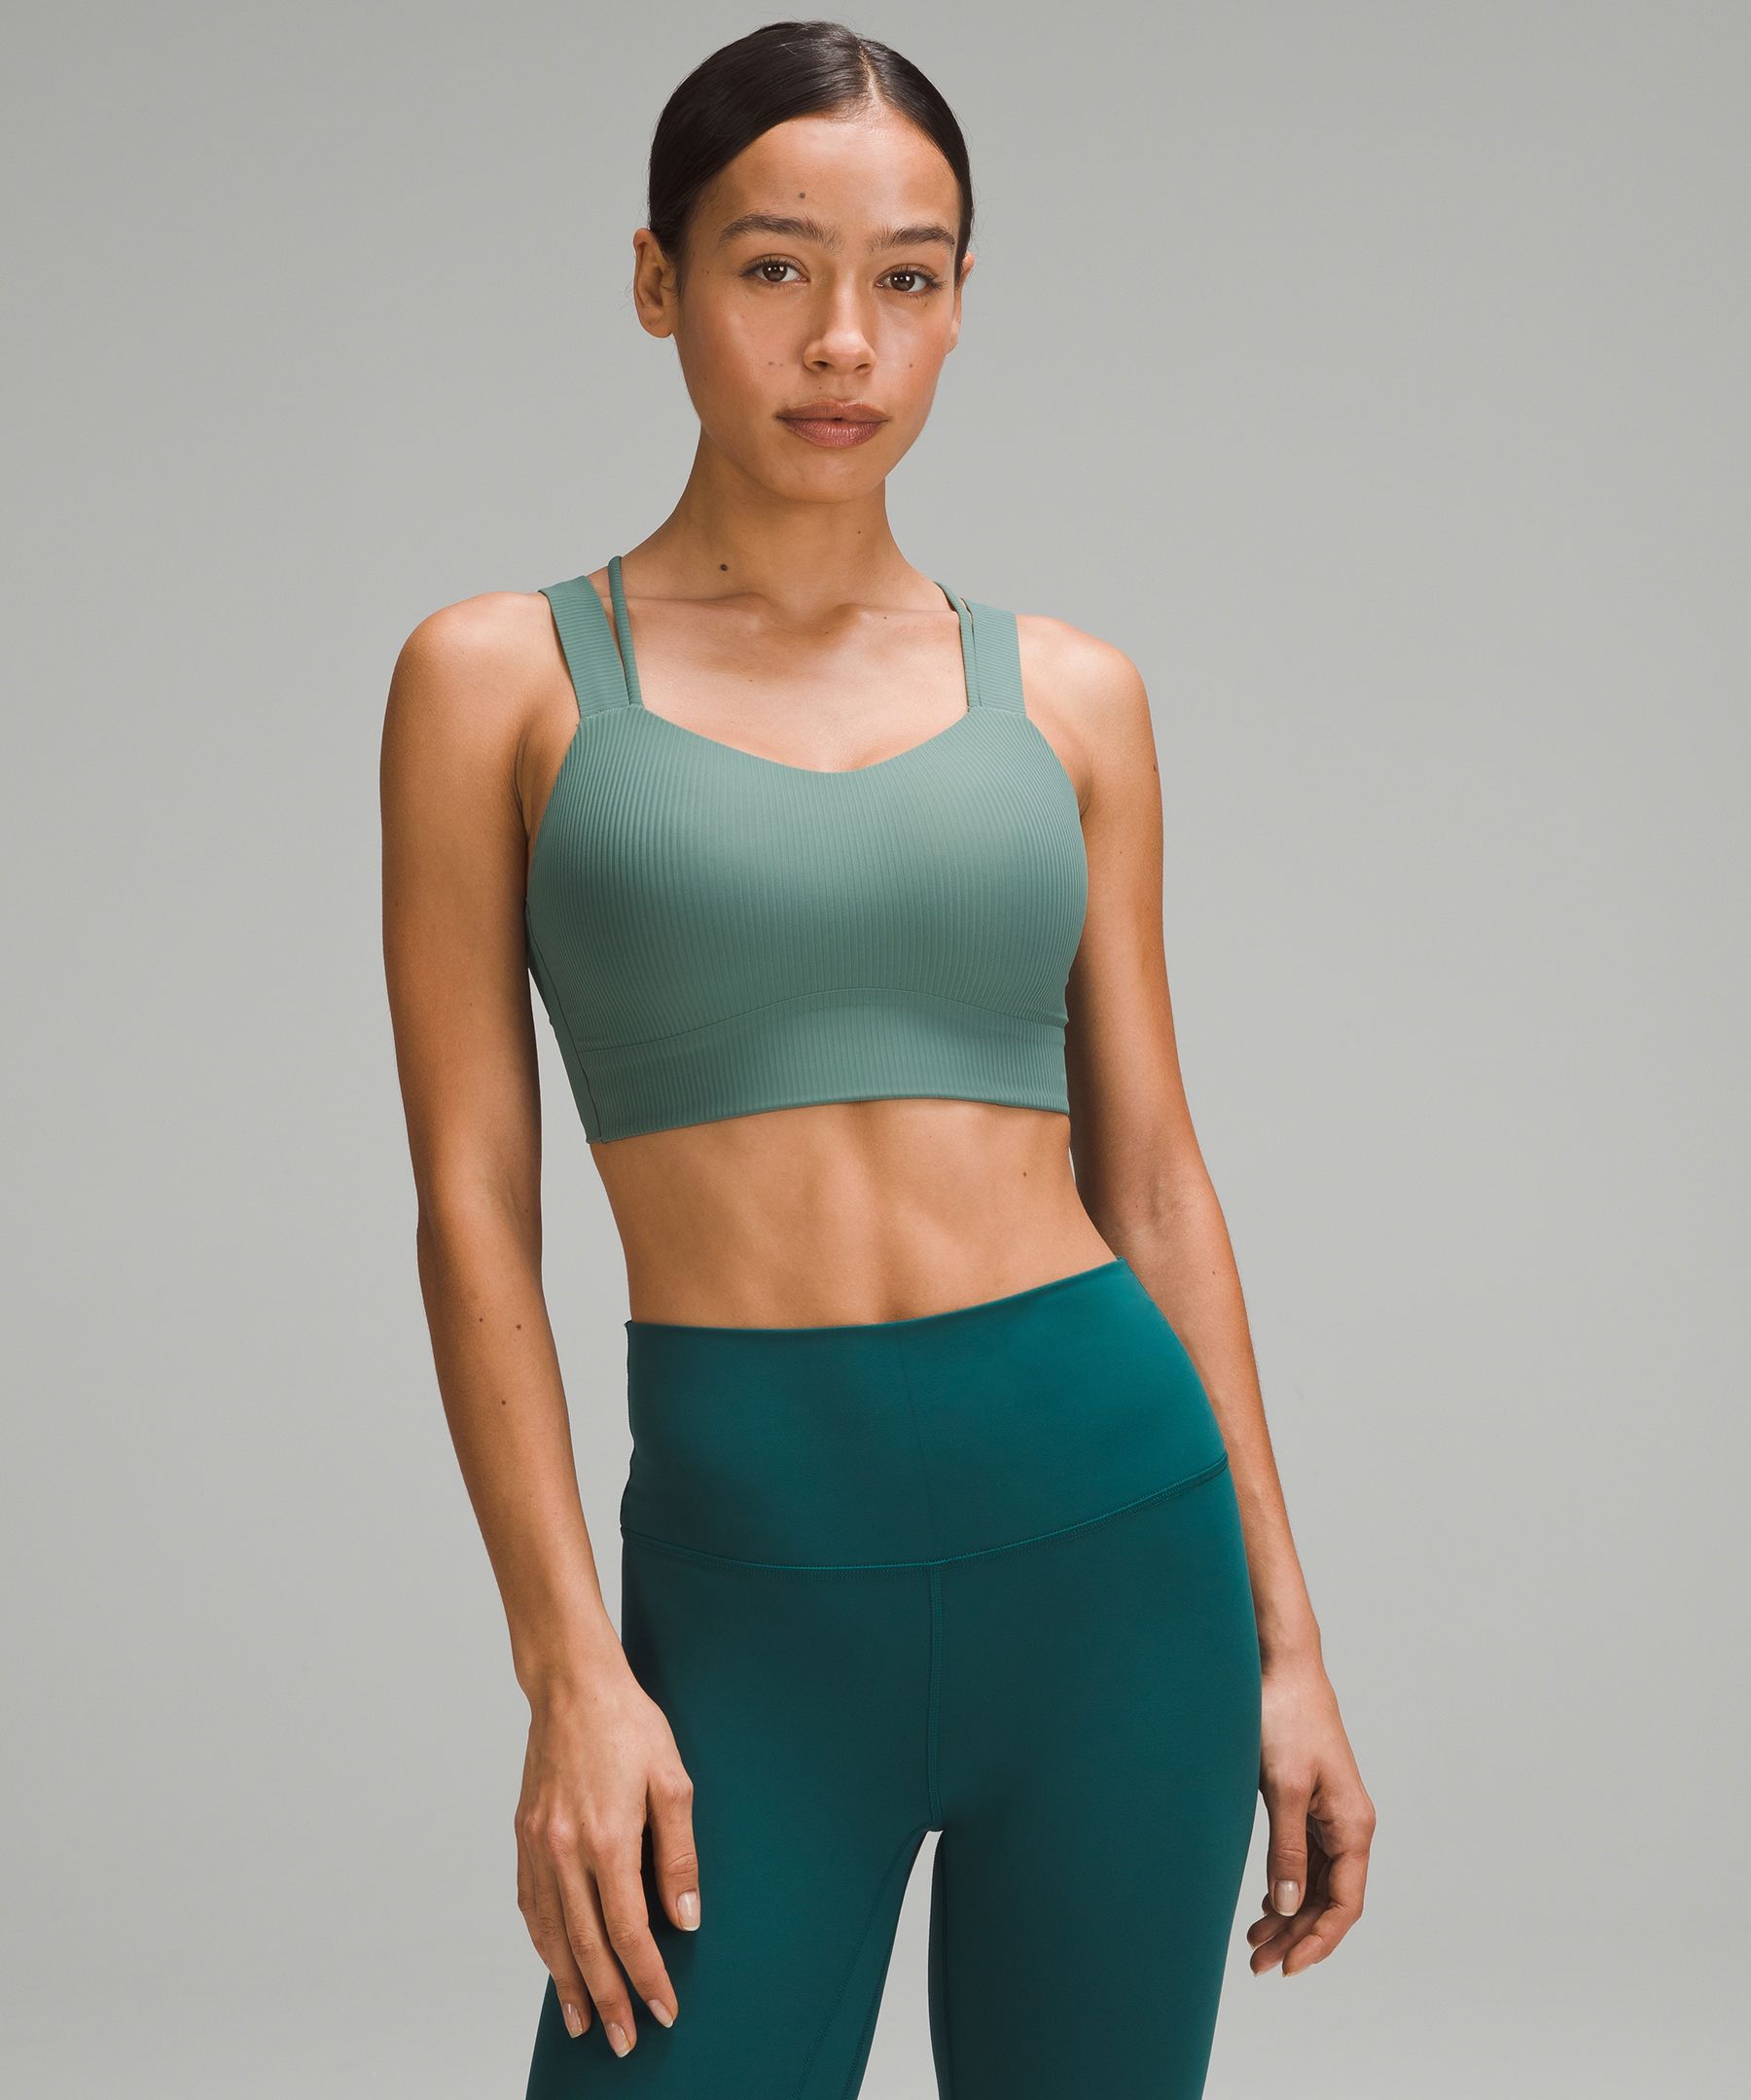 Anyone else find it difficult putting on the Ribbed Longline Yoga